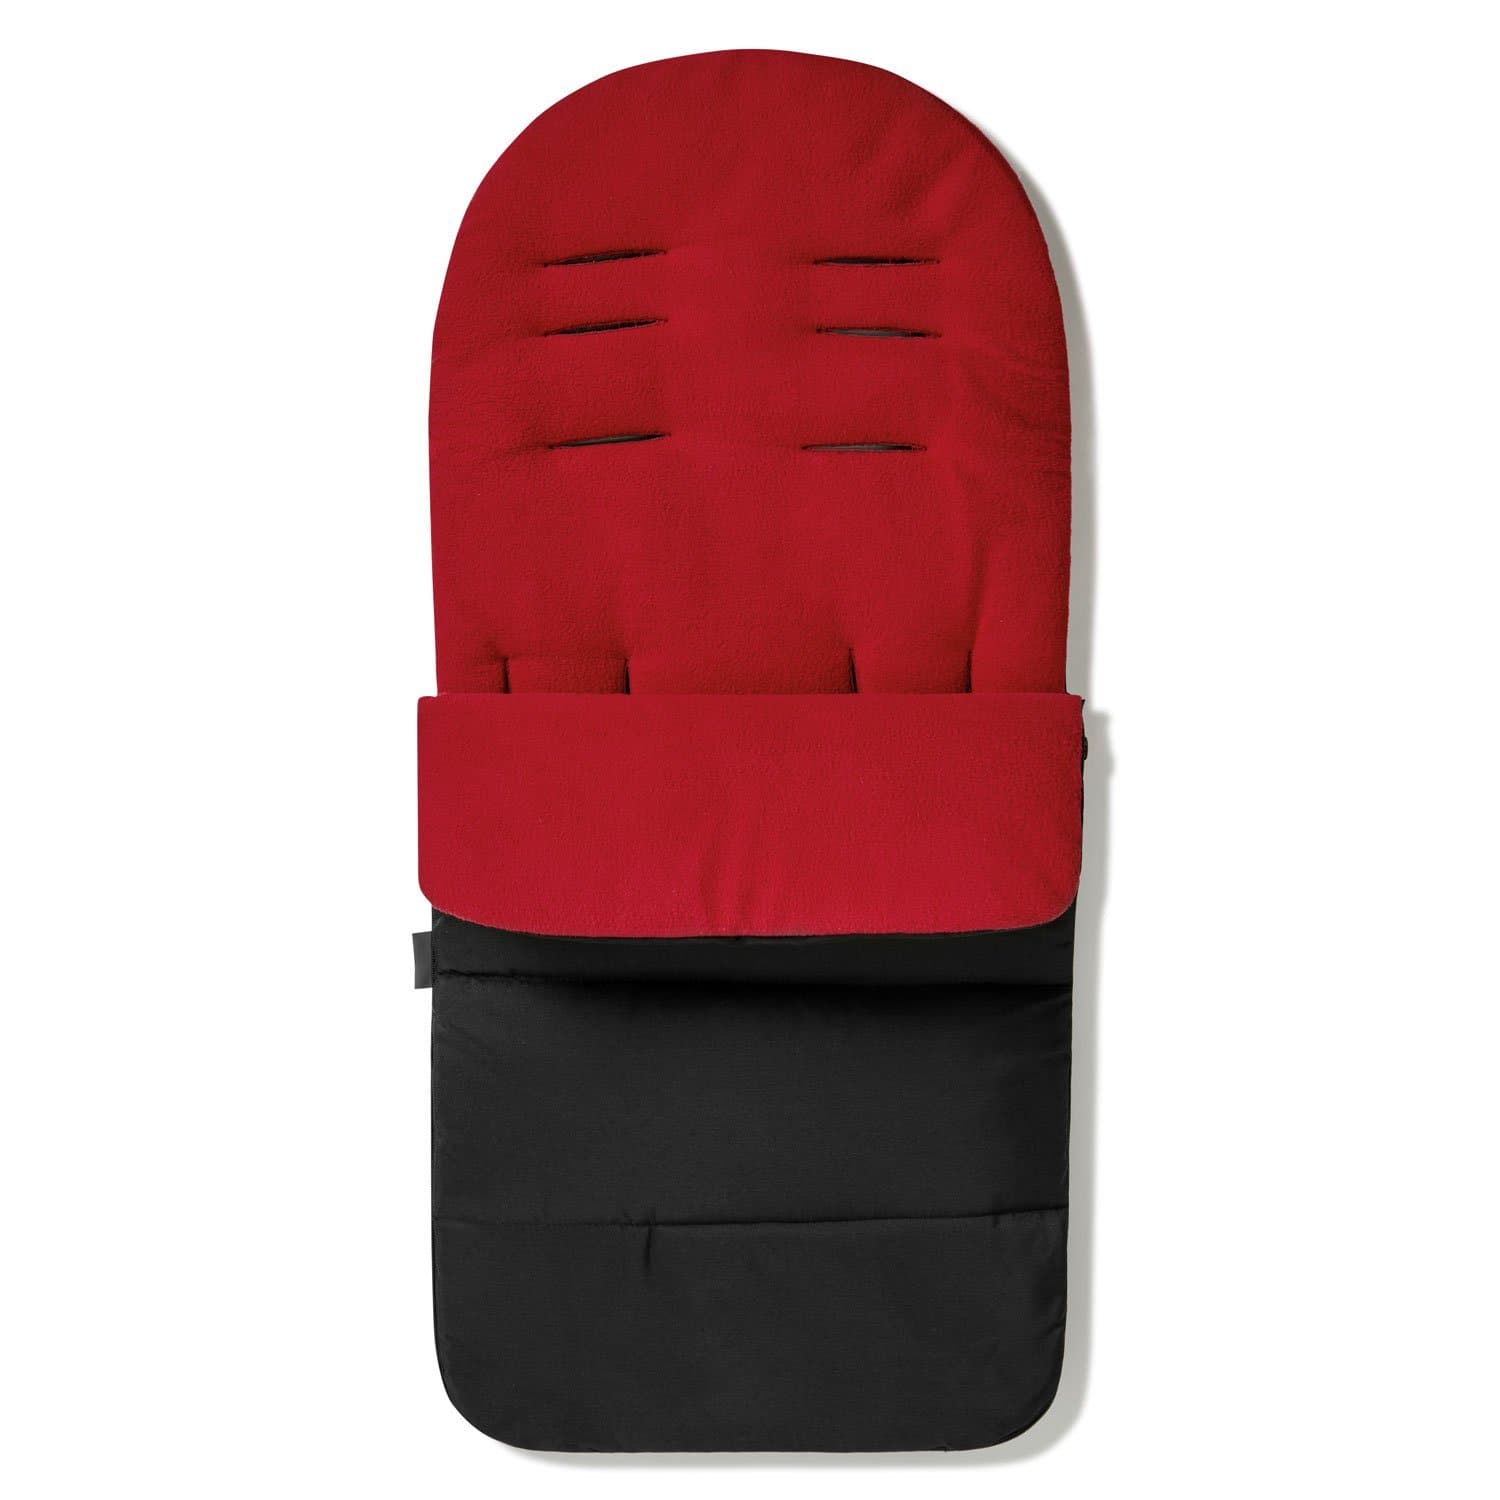 Premium Footmuff / Cosy Toes Compatible with Maxi Cosi - Fire Red / Fits All Models | For Your Little One